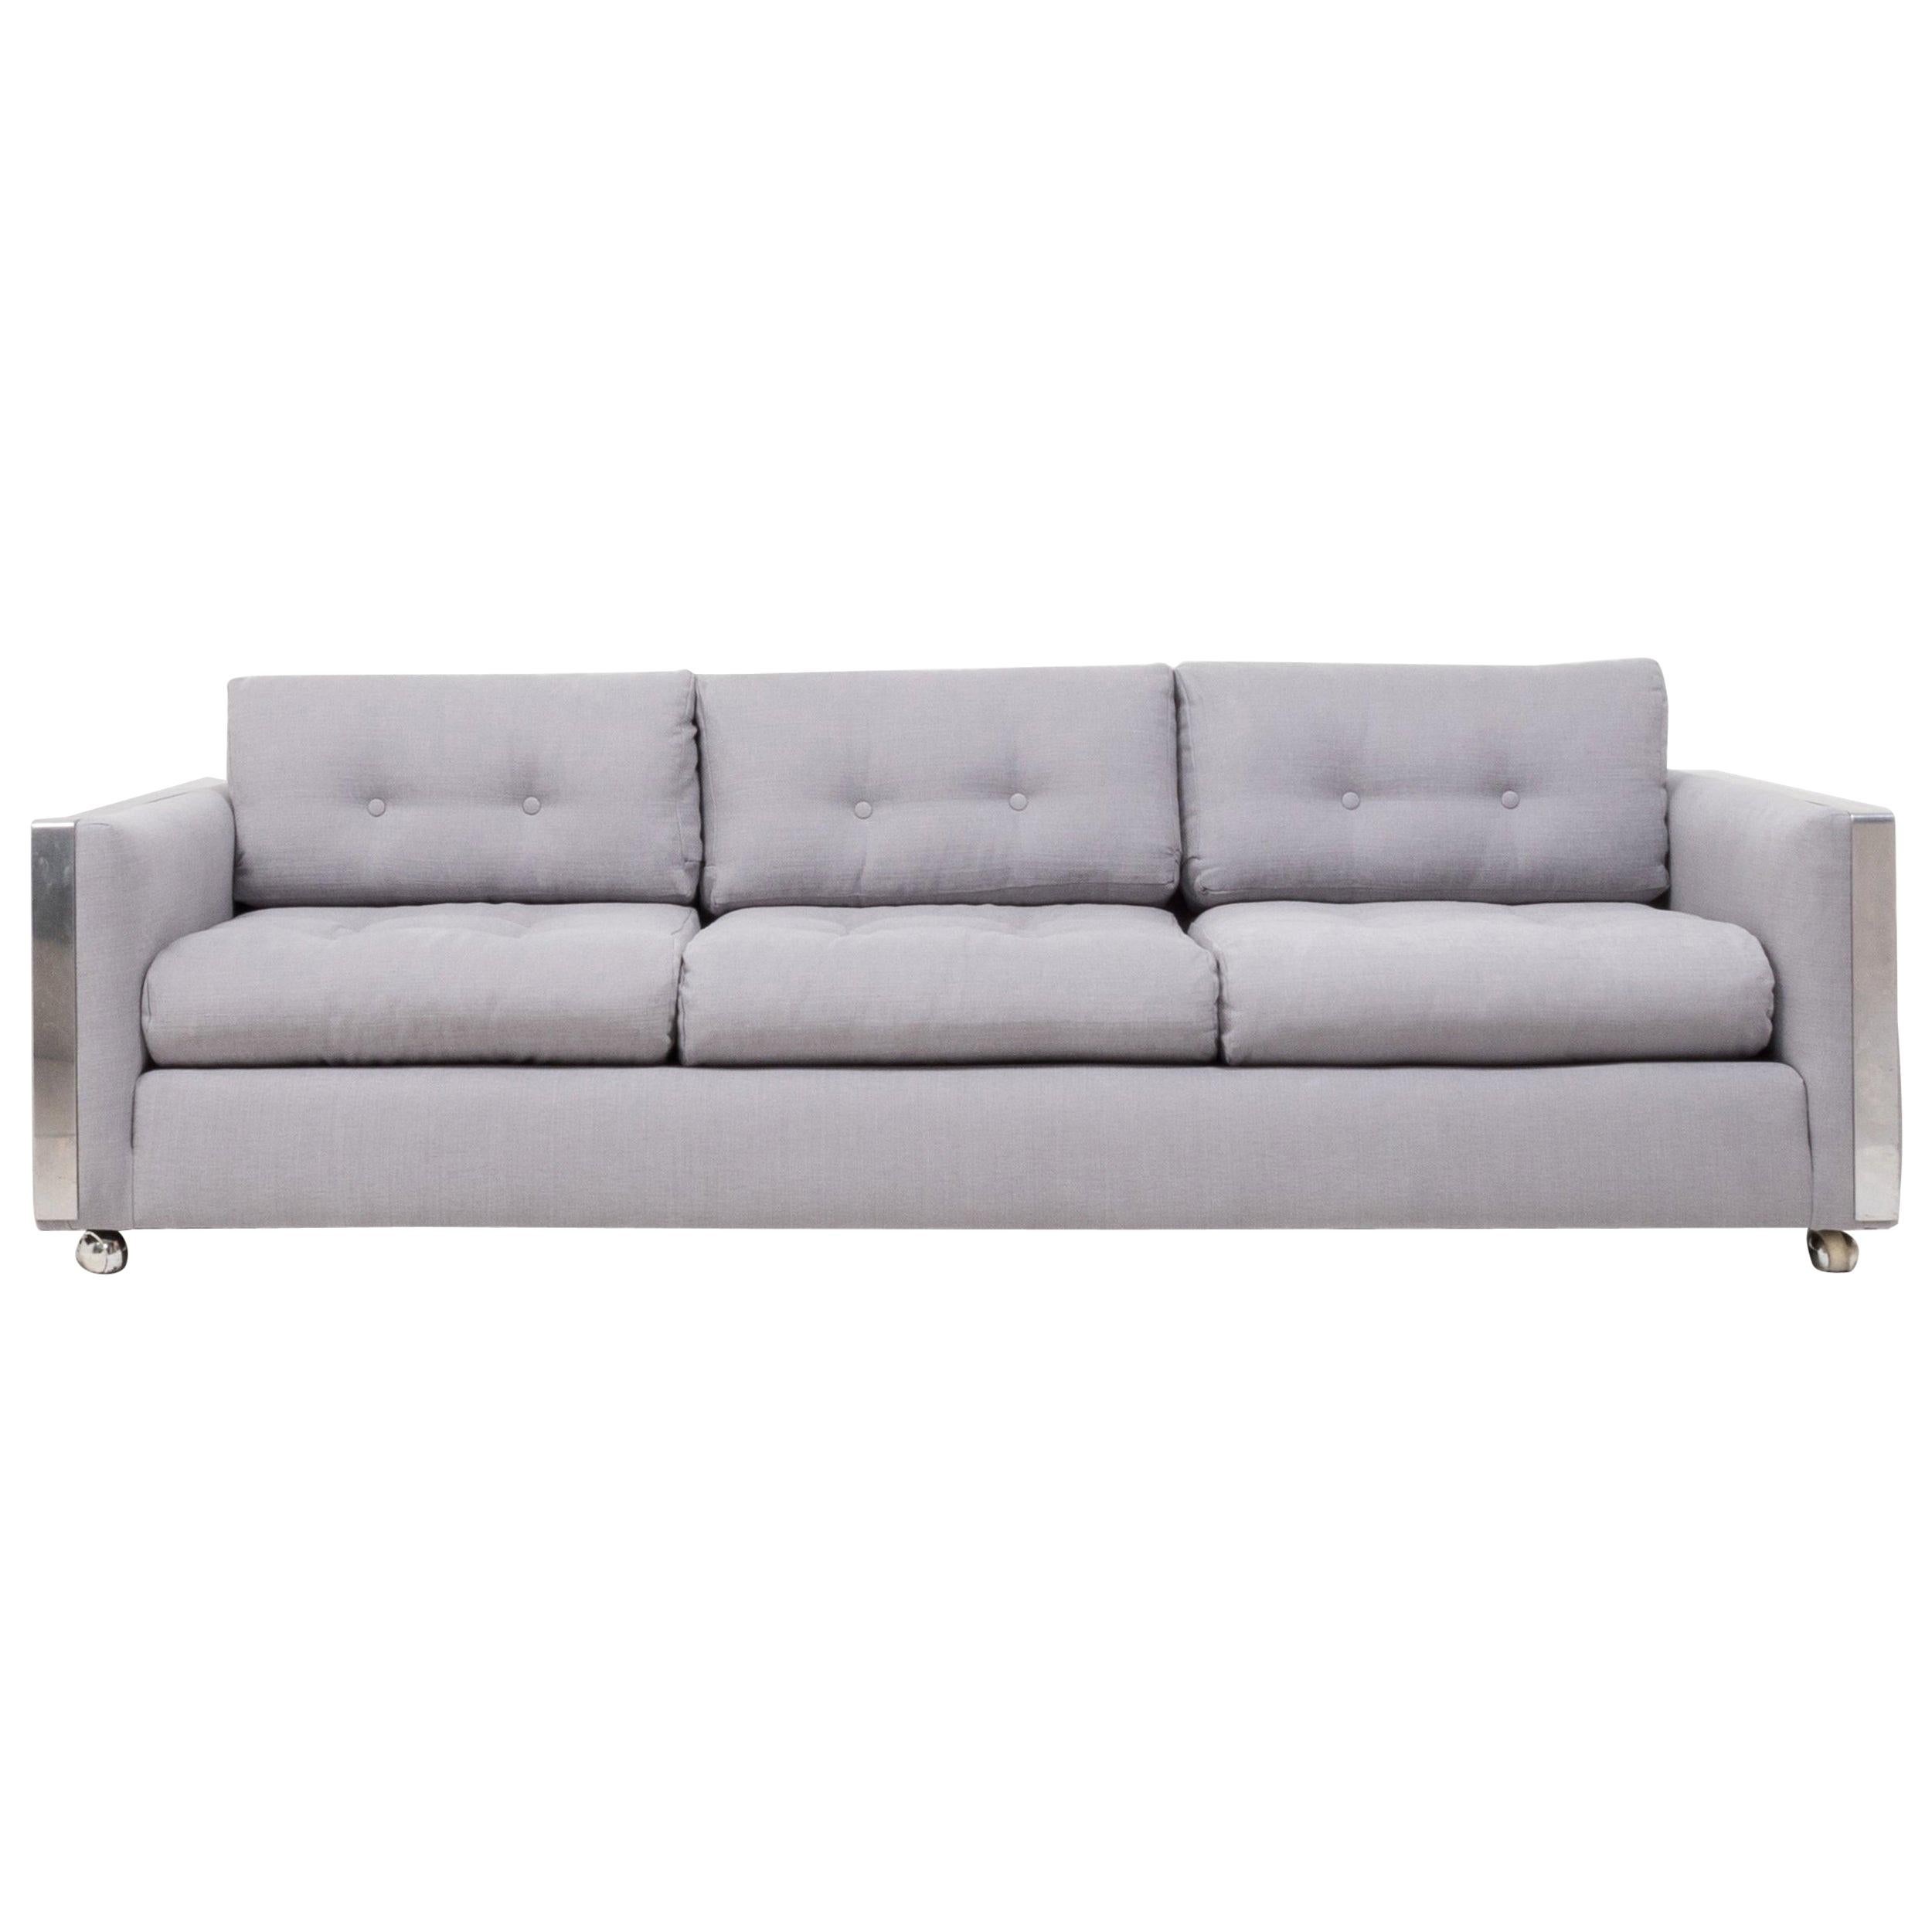 Midcentury Grey and Chrome Frame Three-Seat Sofa in the Style of Milo Baughman